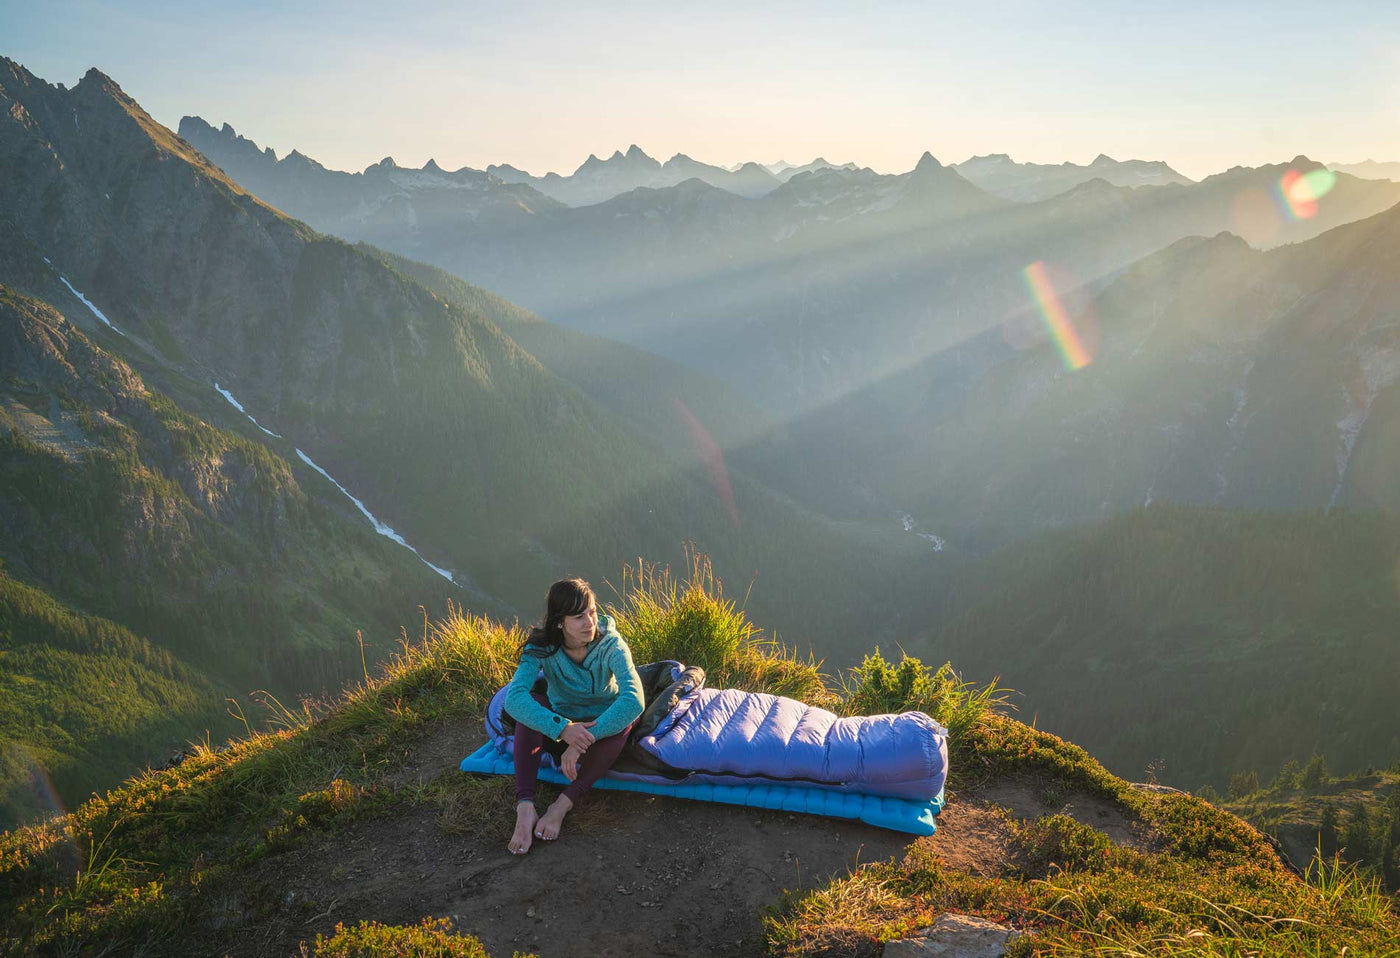 Feathered Friends Down Sleeping Bags. Over 40 models of down sleeping bags from 40ºF (4ºC) to -60ºF (-51ºC). This is the Feathered Friends Egret Down Sleeping Bag at a high camp in the summer in the North Cascades of Washington State